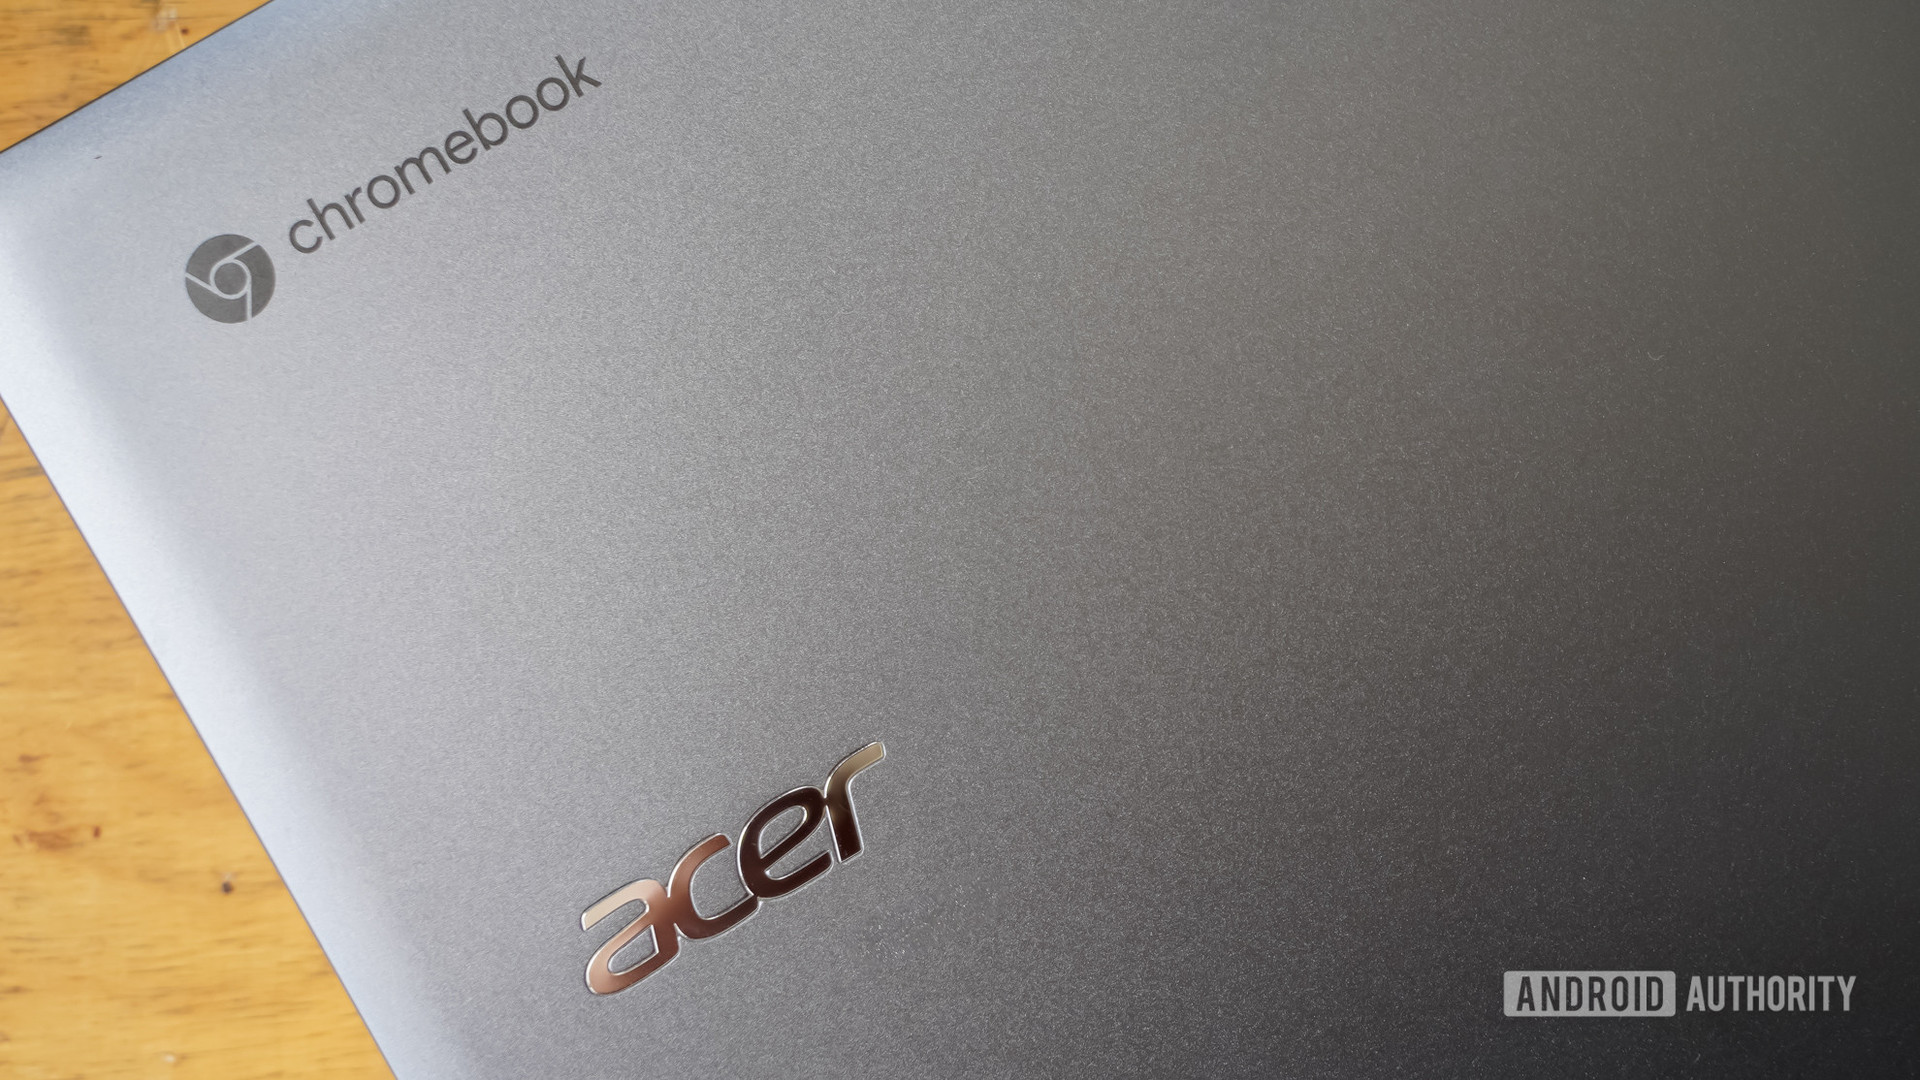 Acer Chromebook Spin 714 hands-on: The next step in pro Chromebooks